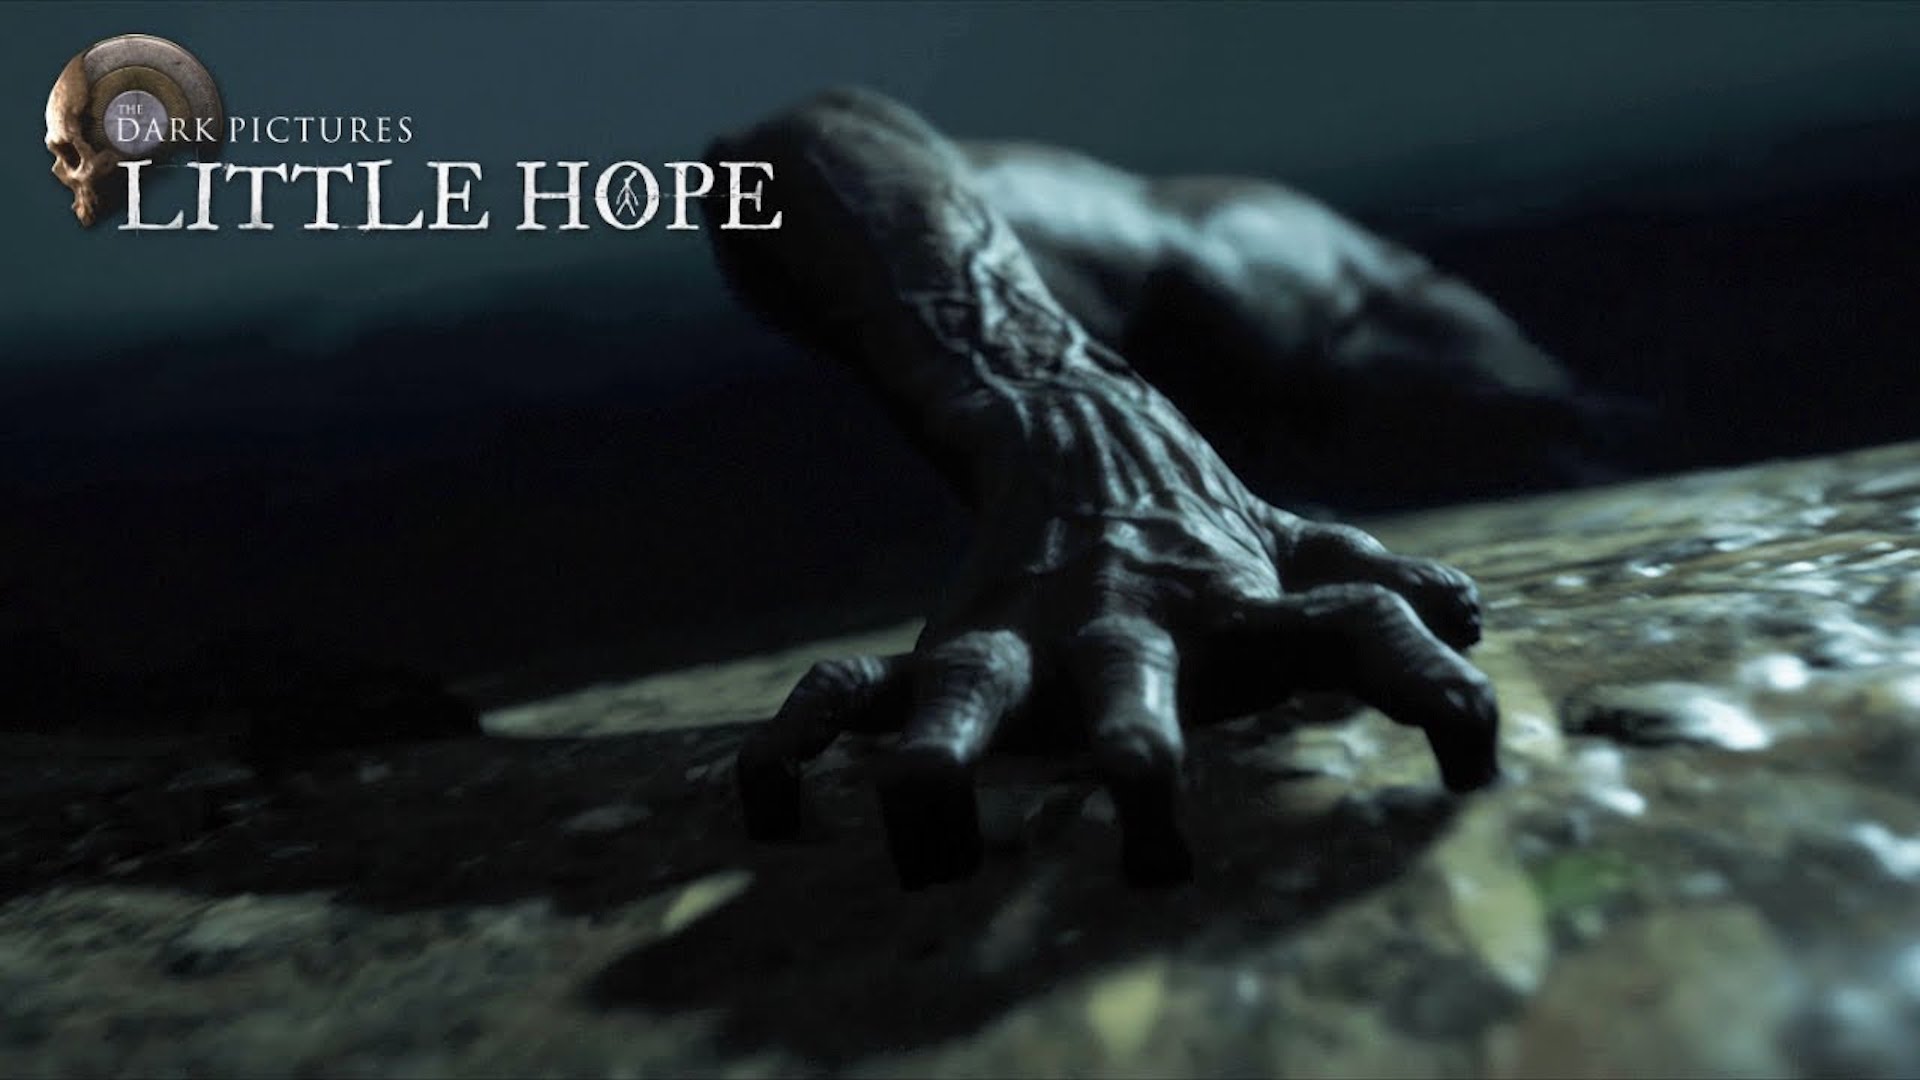 The Dark Pictures Anthology: Little Hope Pc Requirements Revealed